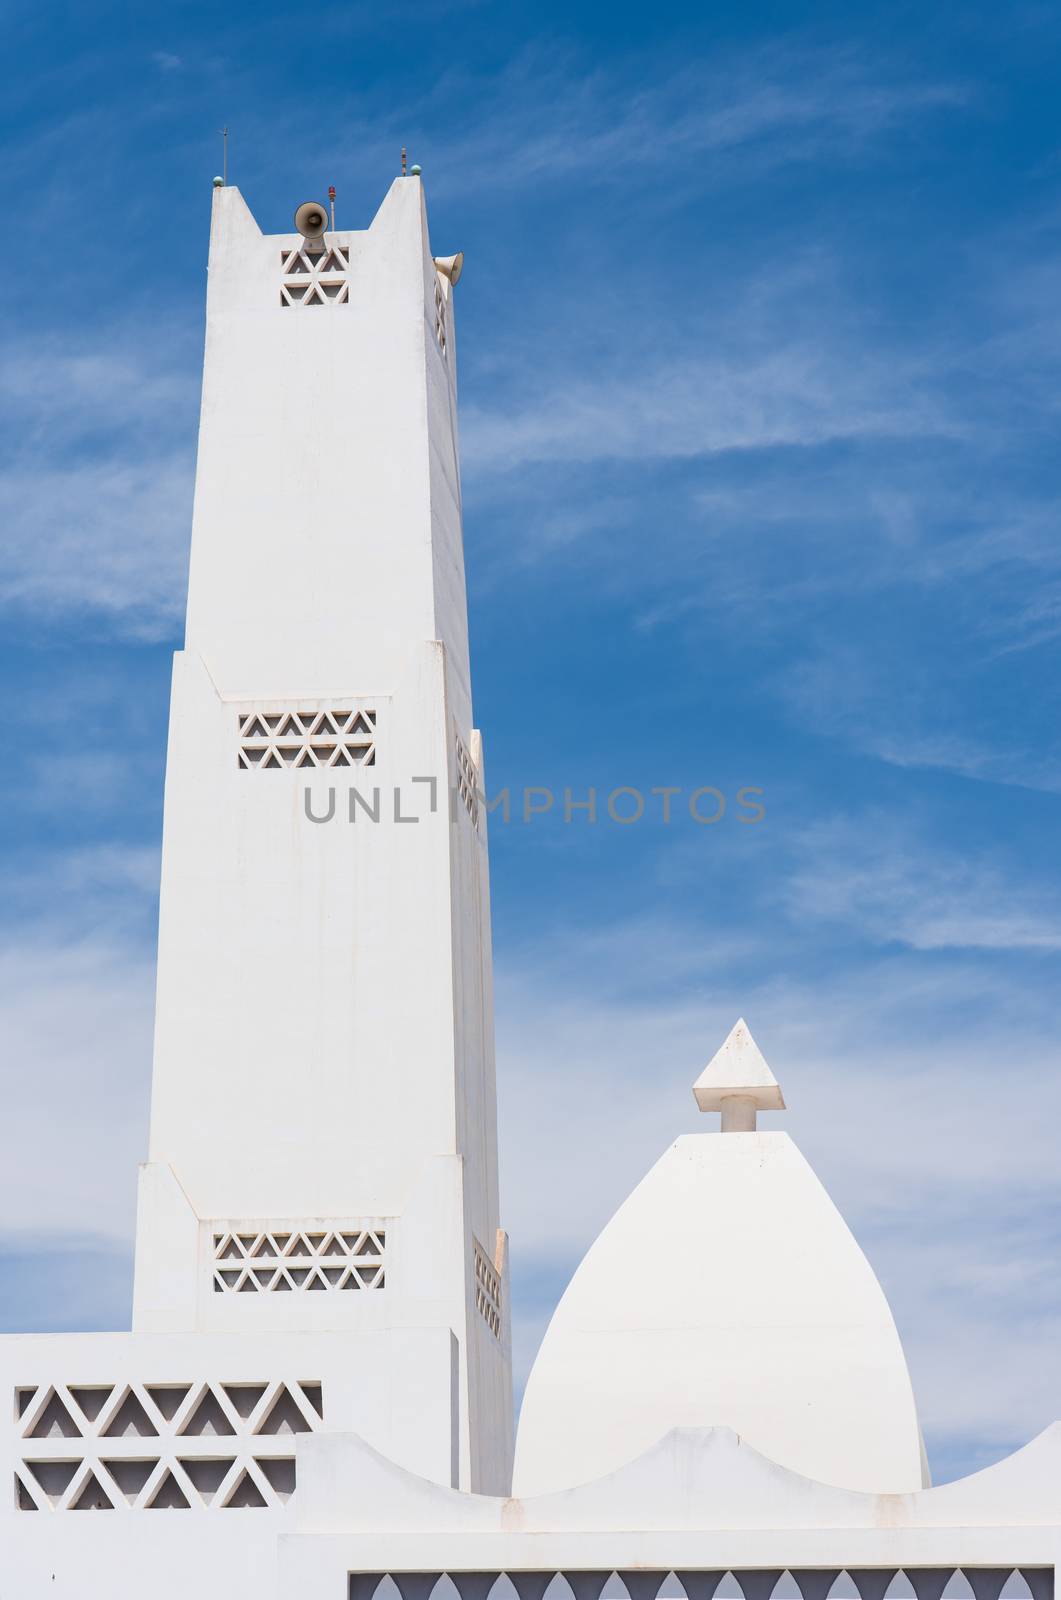 The minaret of Masjid Aqeel Mosque in Salalah, Oman. The mosque was originally built in 1779, making it one of the oldest mosques in Salalah.